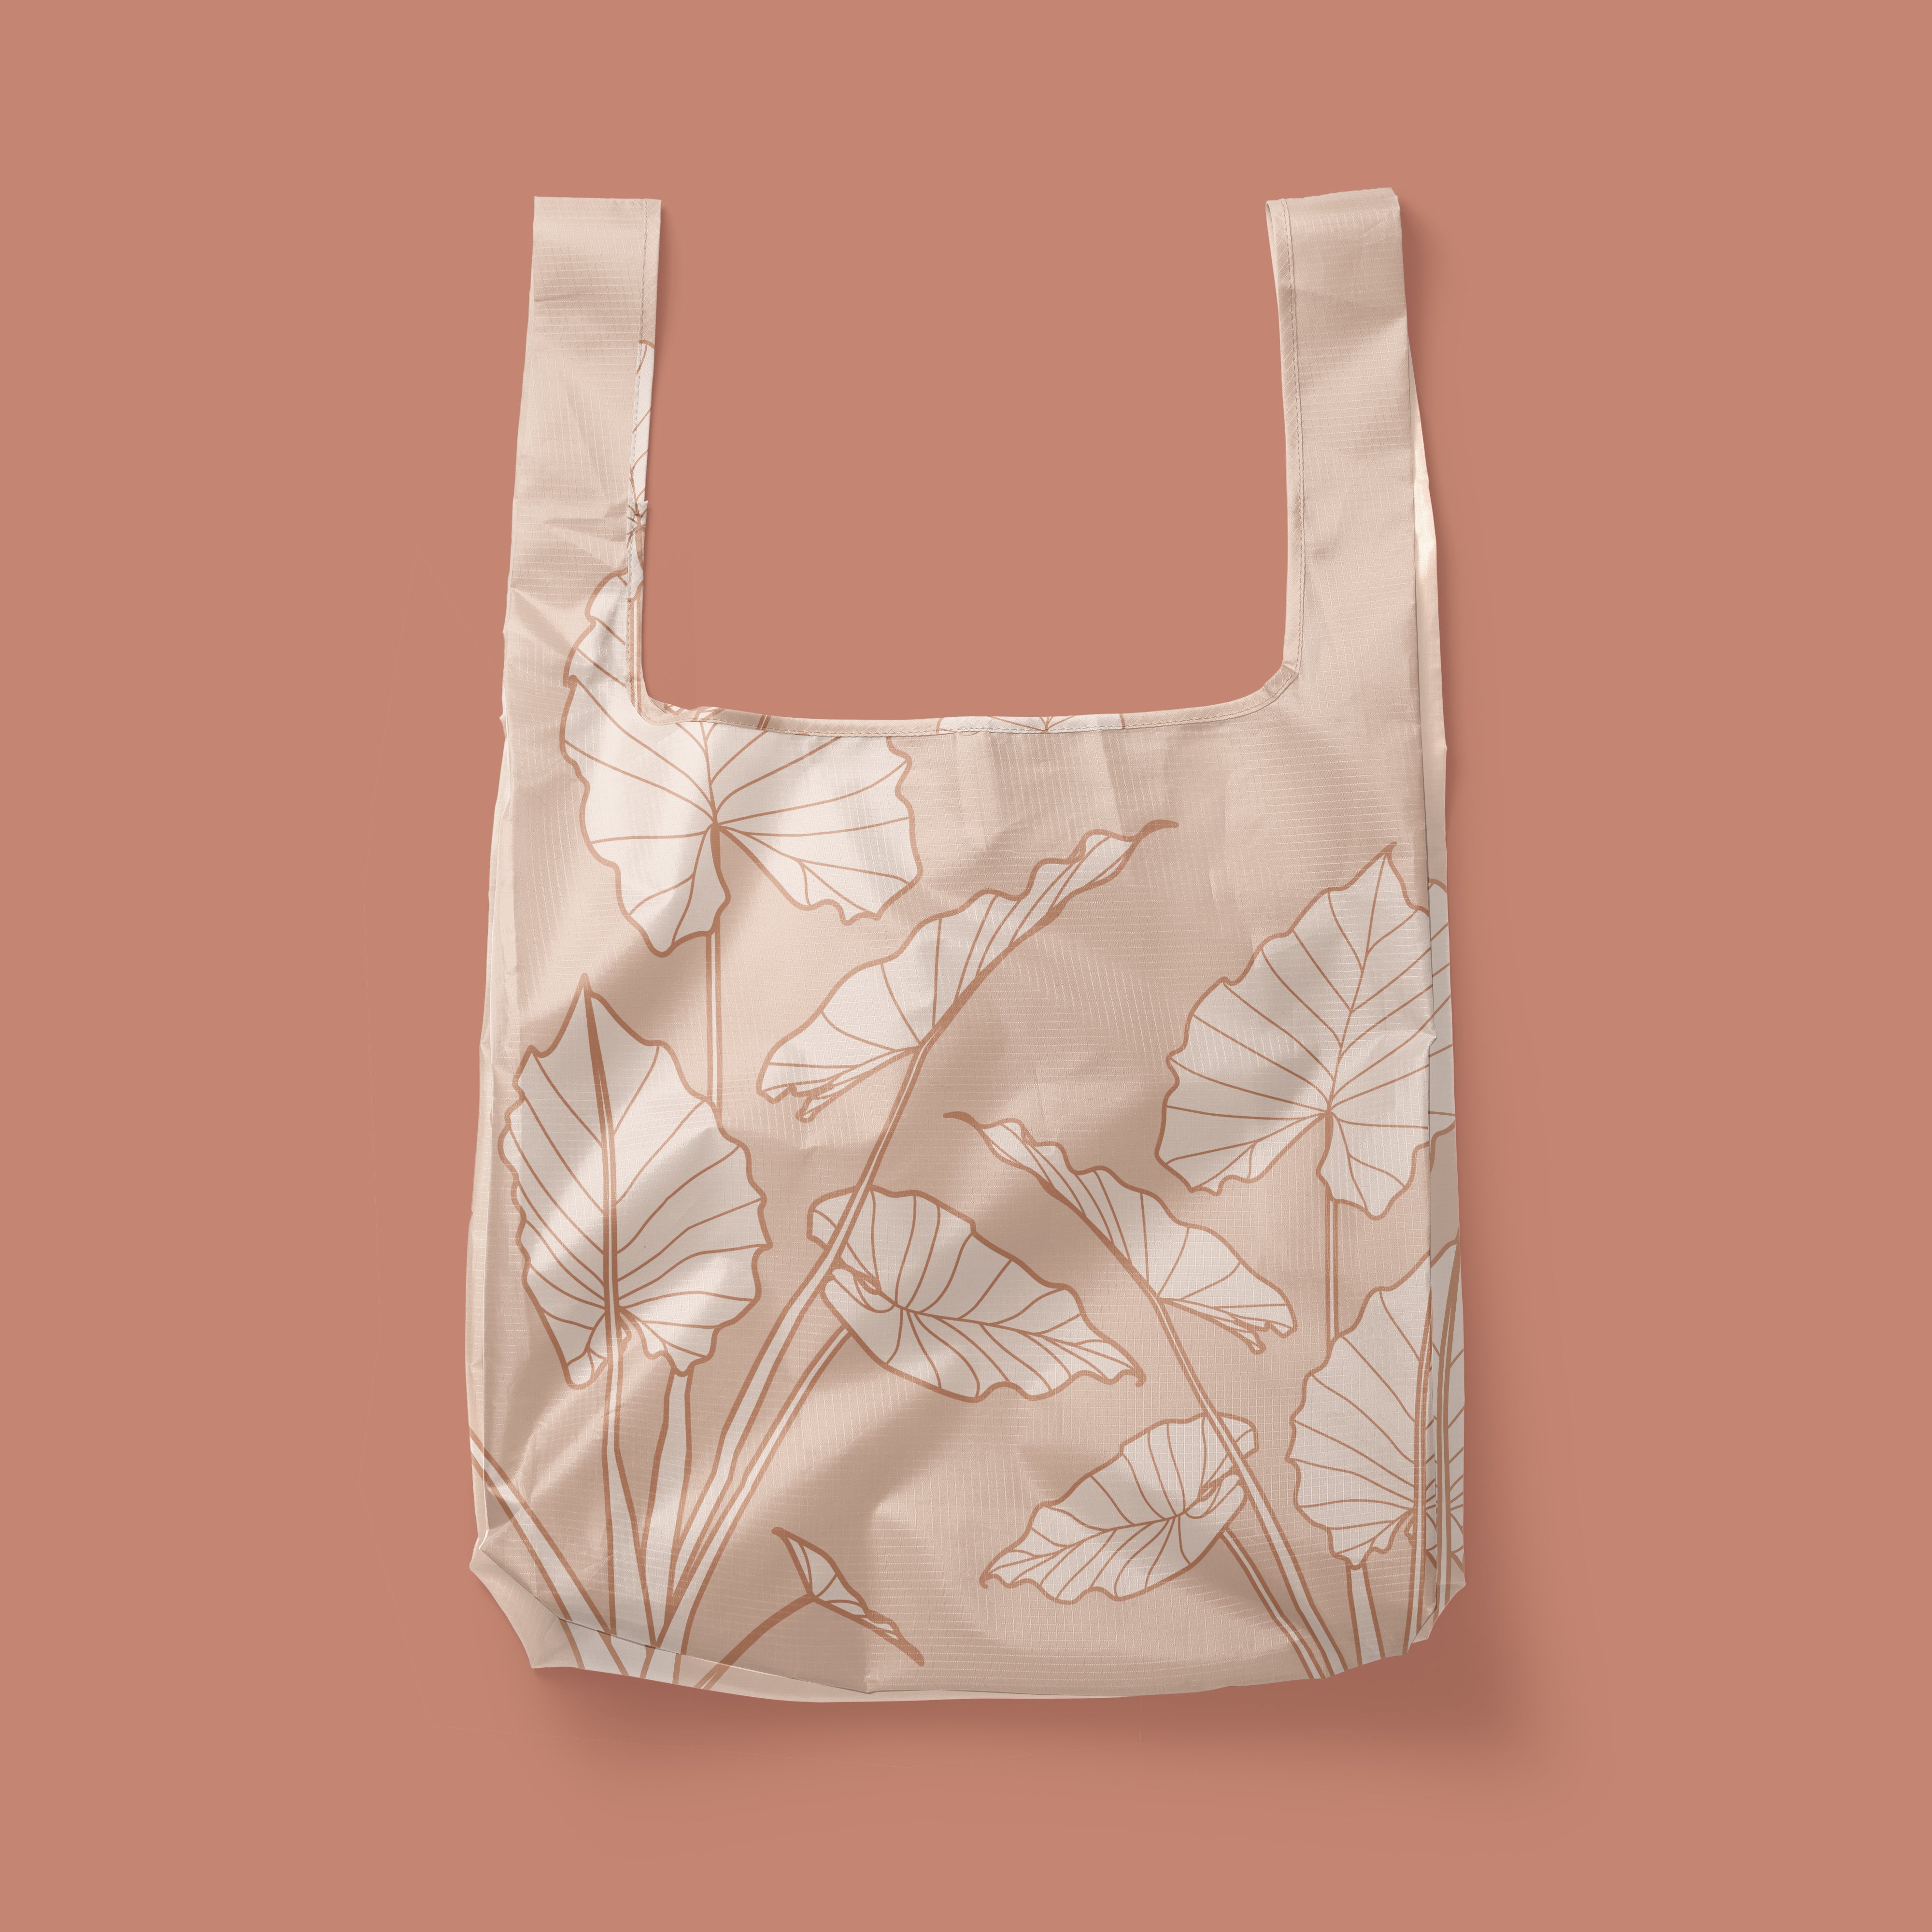 Photographed in front of a rose colored background is a light pink / tan nylon reusable tote with cream and darker terracotta line drawings of alocasia leaves. There is a squared off design to the bag and two handles that can be held or used over your shoulder.